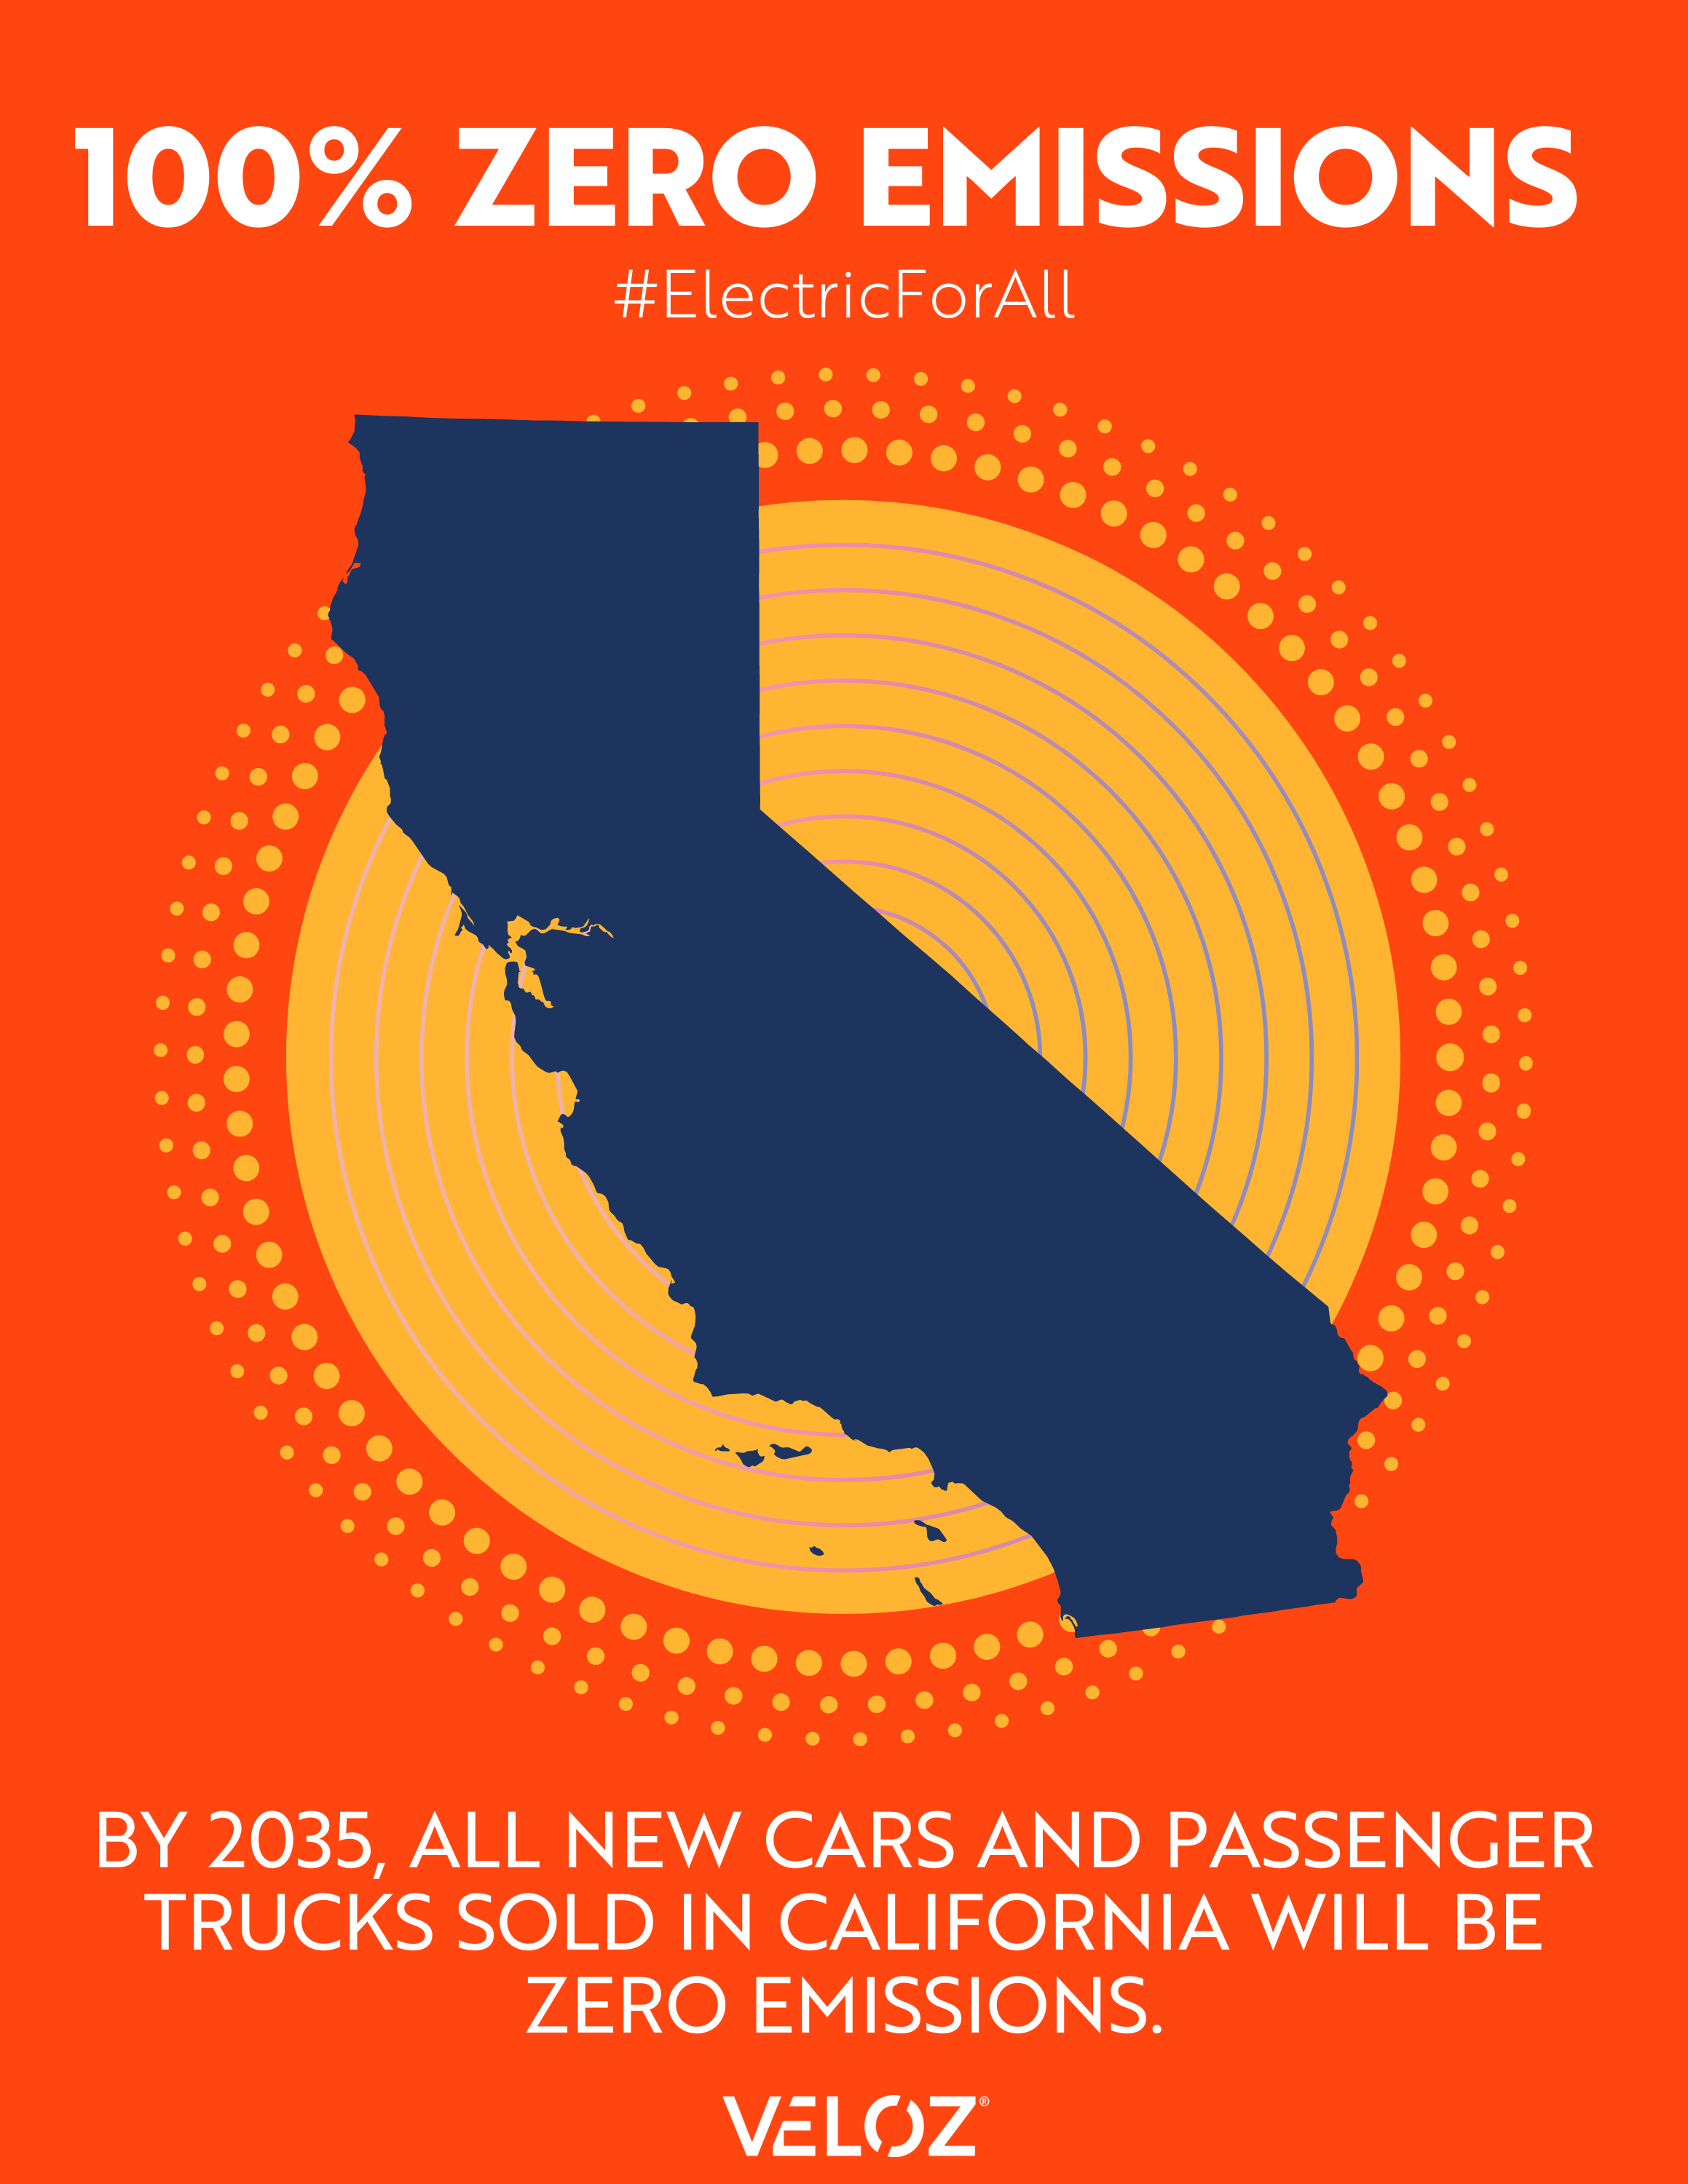 Gov. Newsom Announces 100% of New Cars and Passenger Trucks Sold in California to be Zero-Emissions by 2035